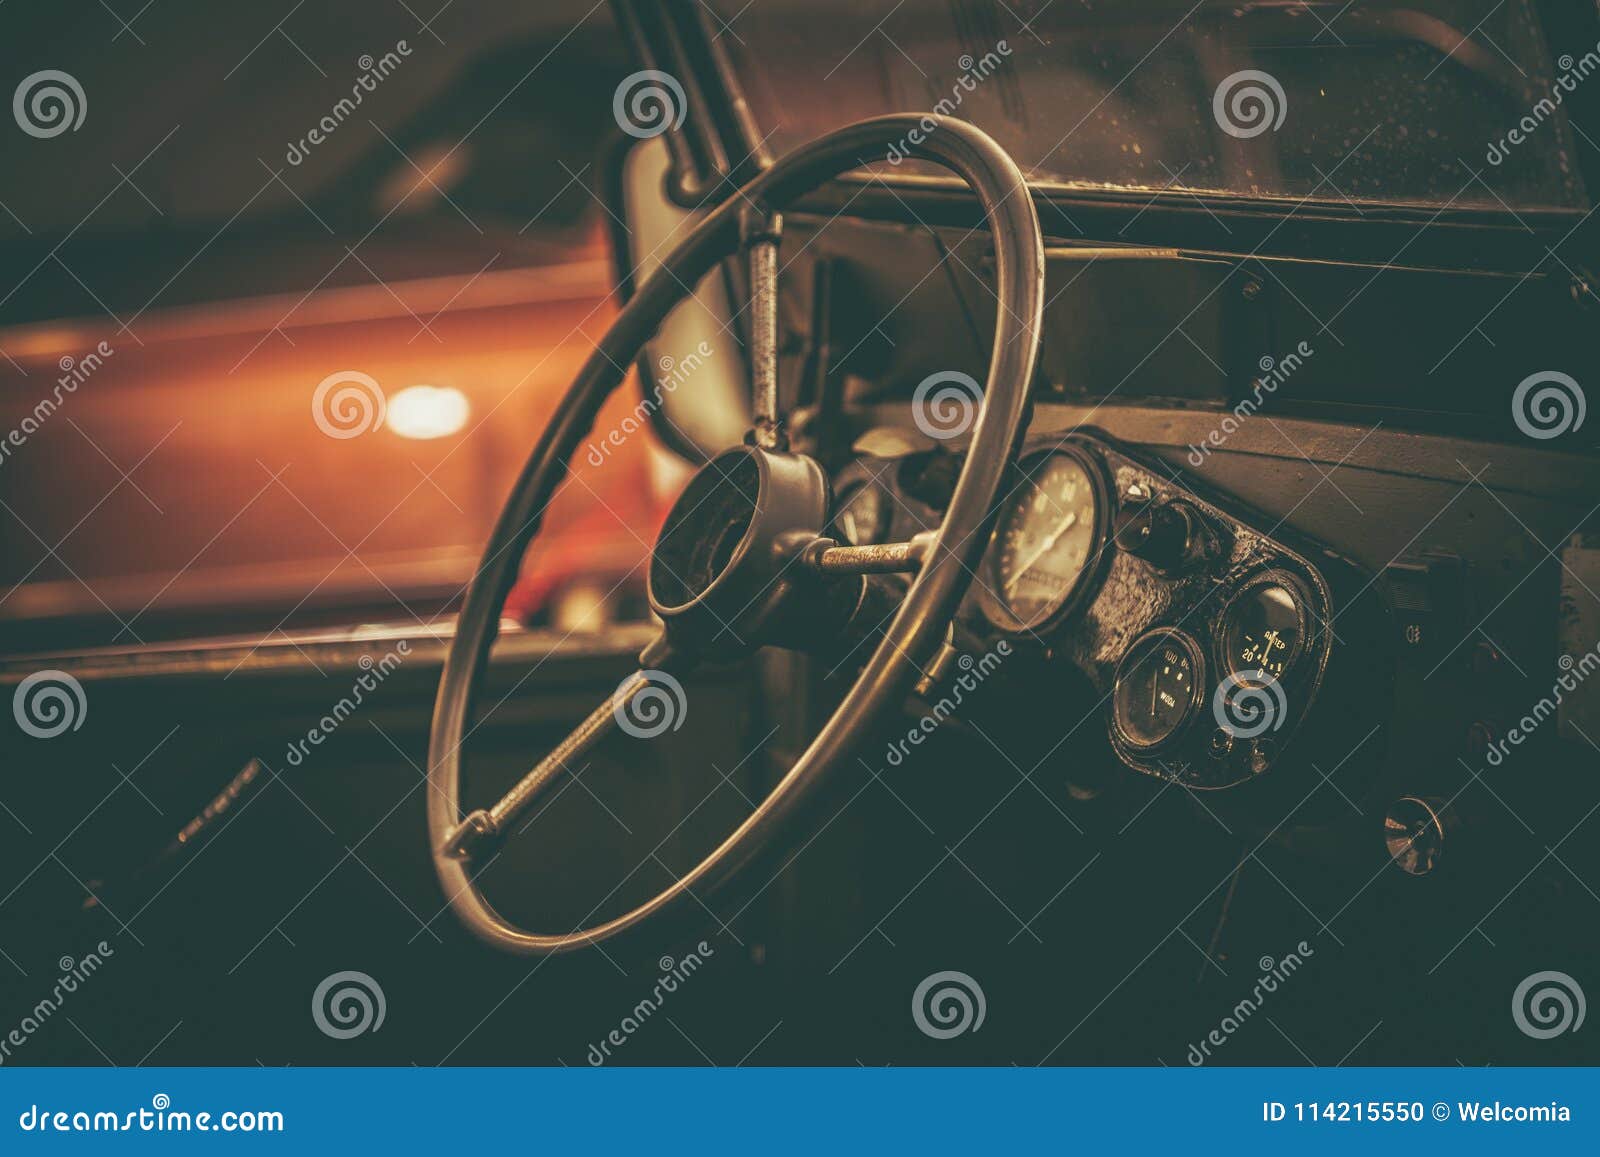 Aged Classic Car Interior Stock Photo Image Of Vintage